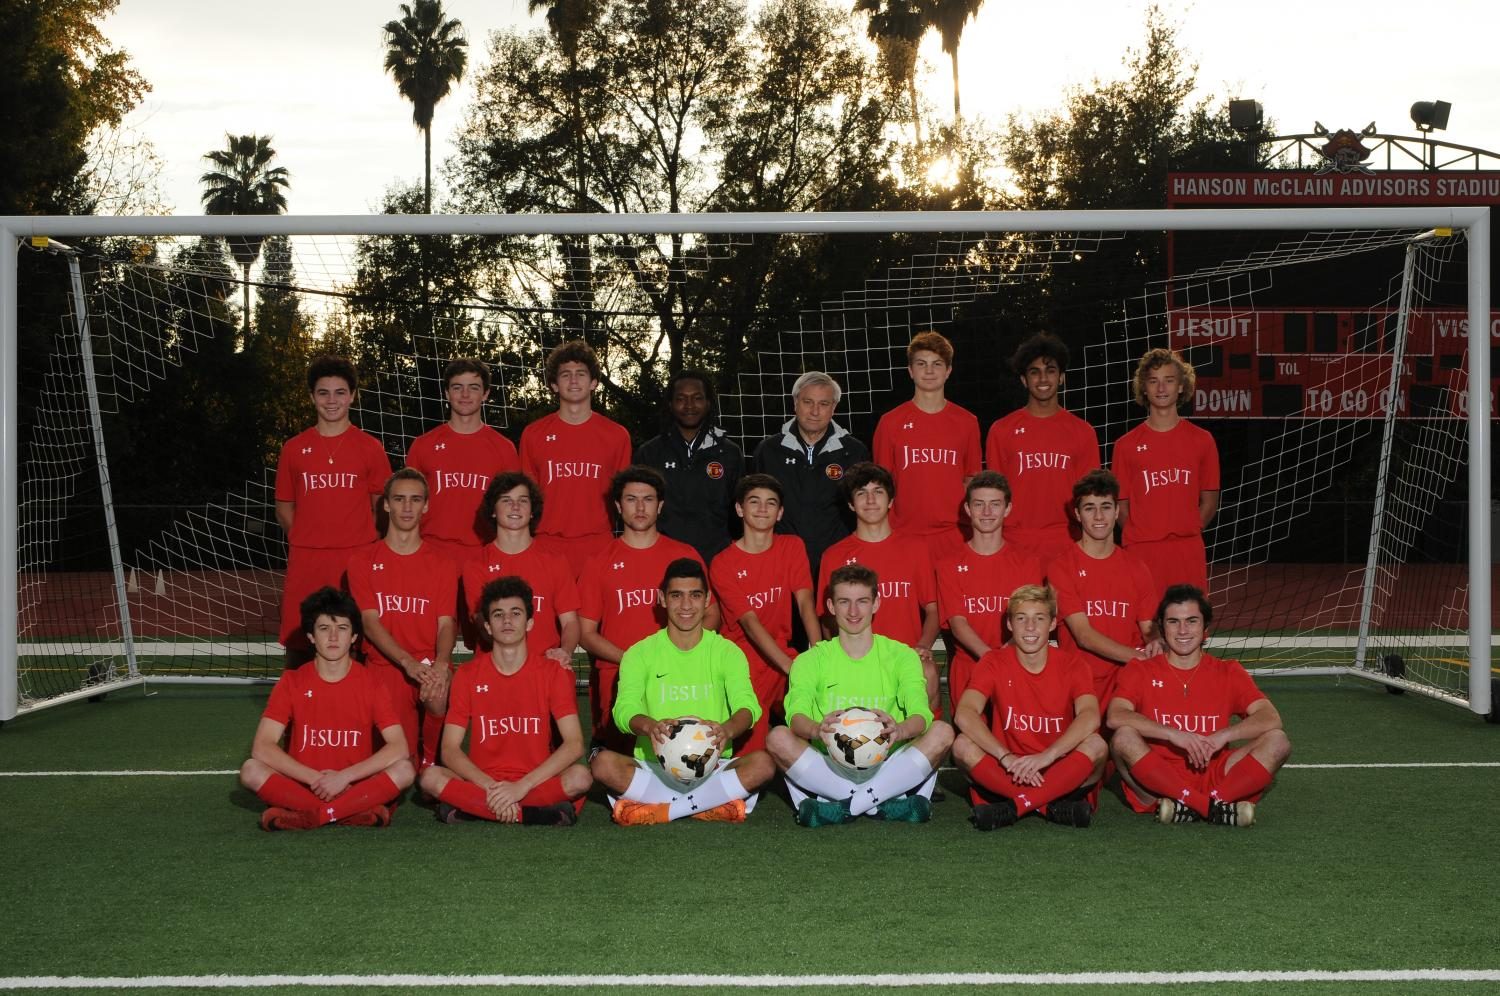 Sam Pettinato 18 (middle row, far right) poses with his team. | Jesuit Communications